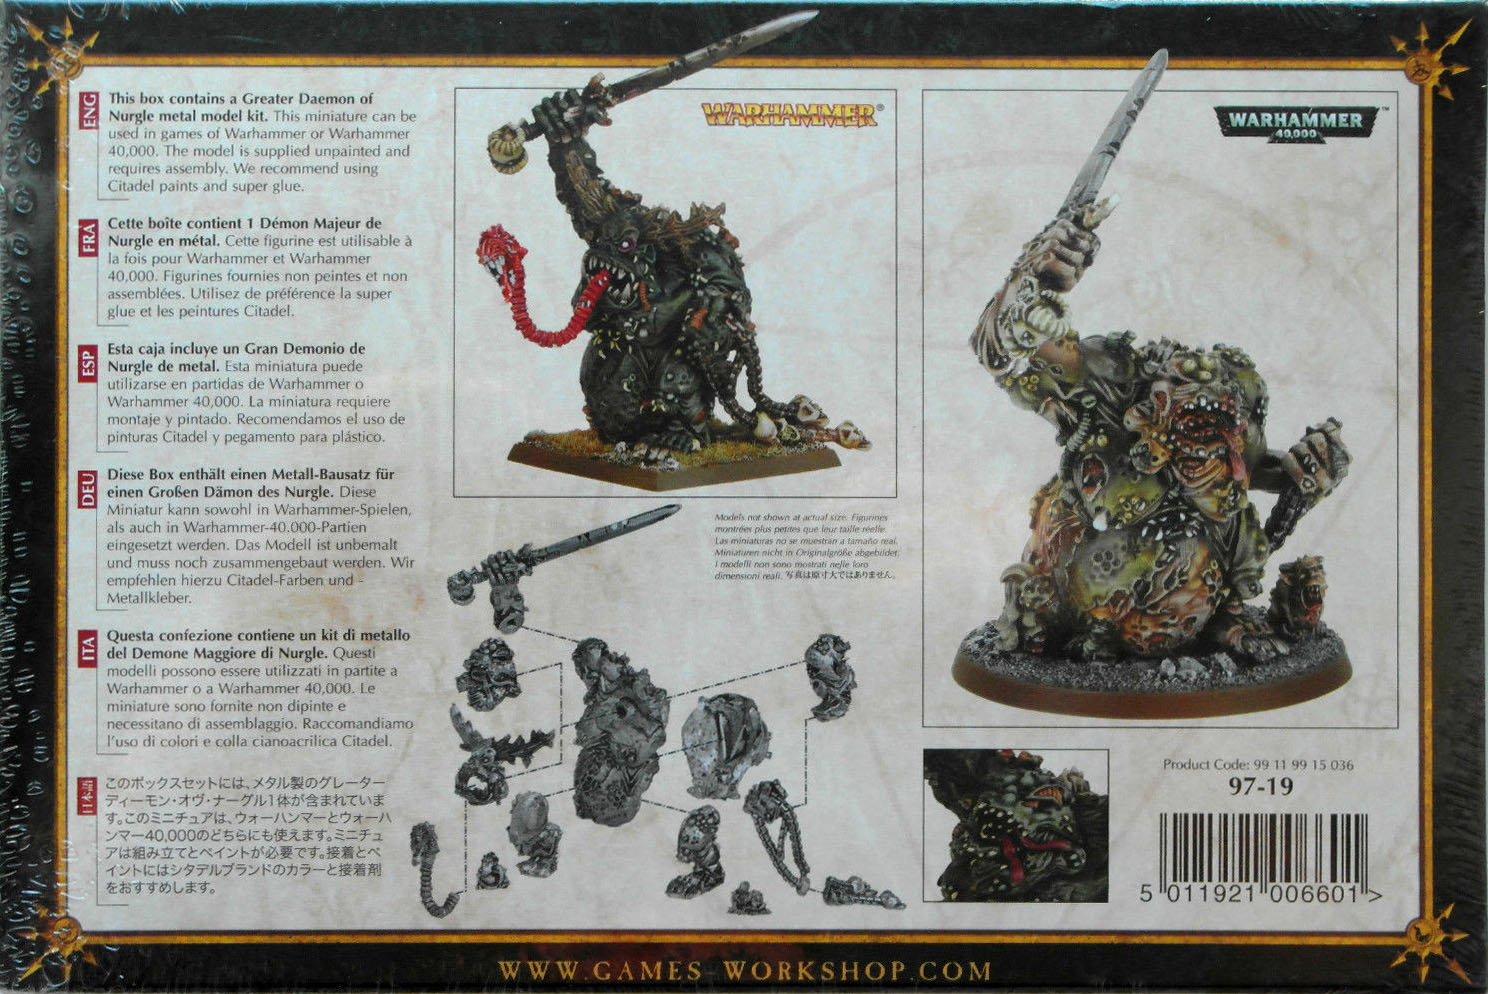 Collector-Info: 99119915036 (97-19) Daemons of Chaos Greater 